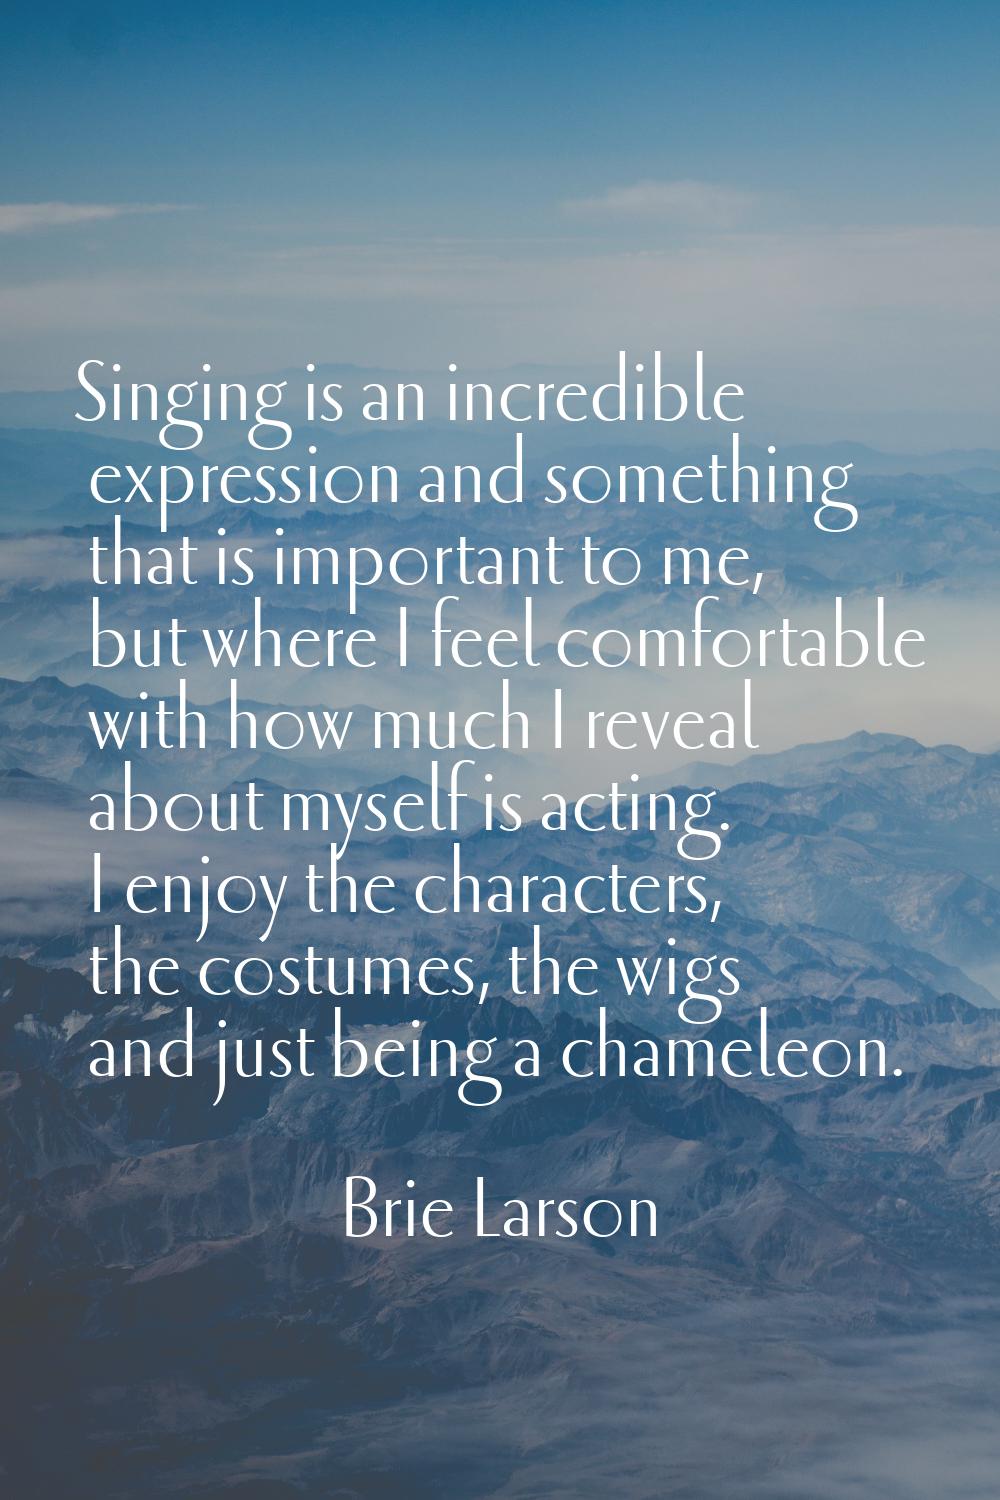 Singing is an incredible expression and something that is important to me, but where I feel comfort